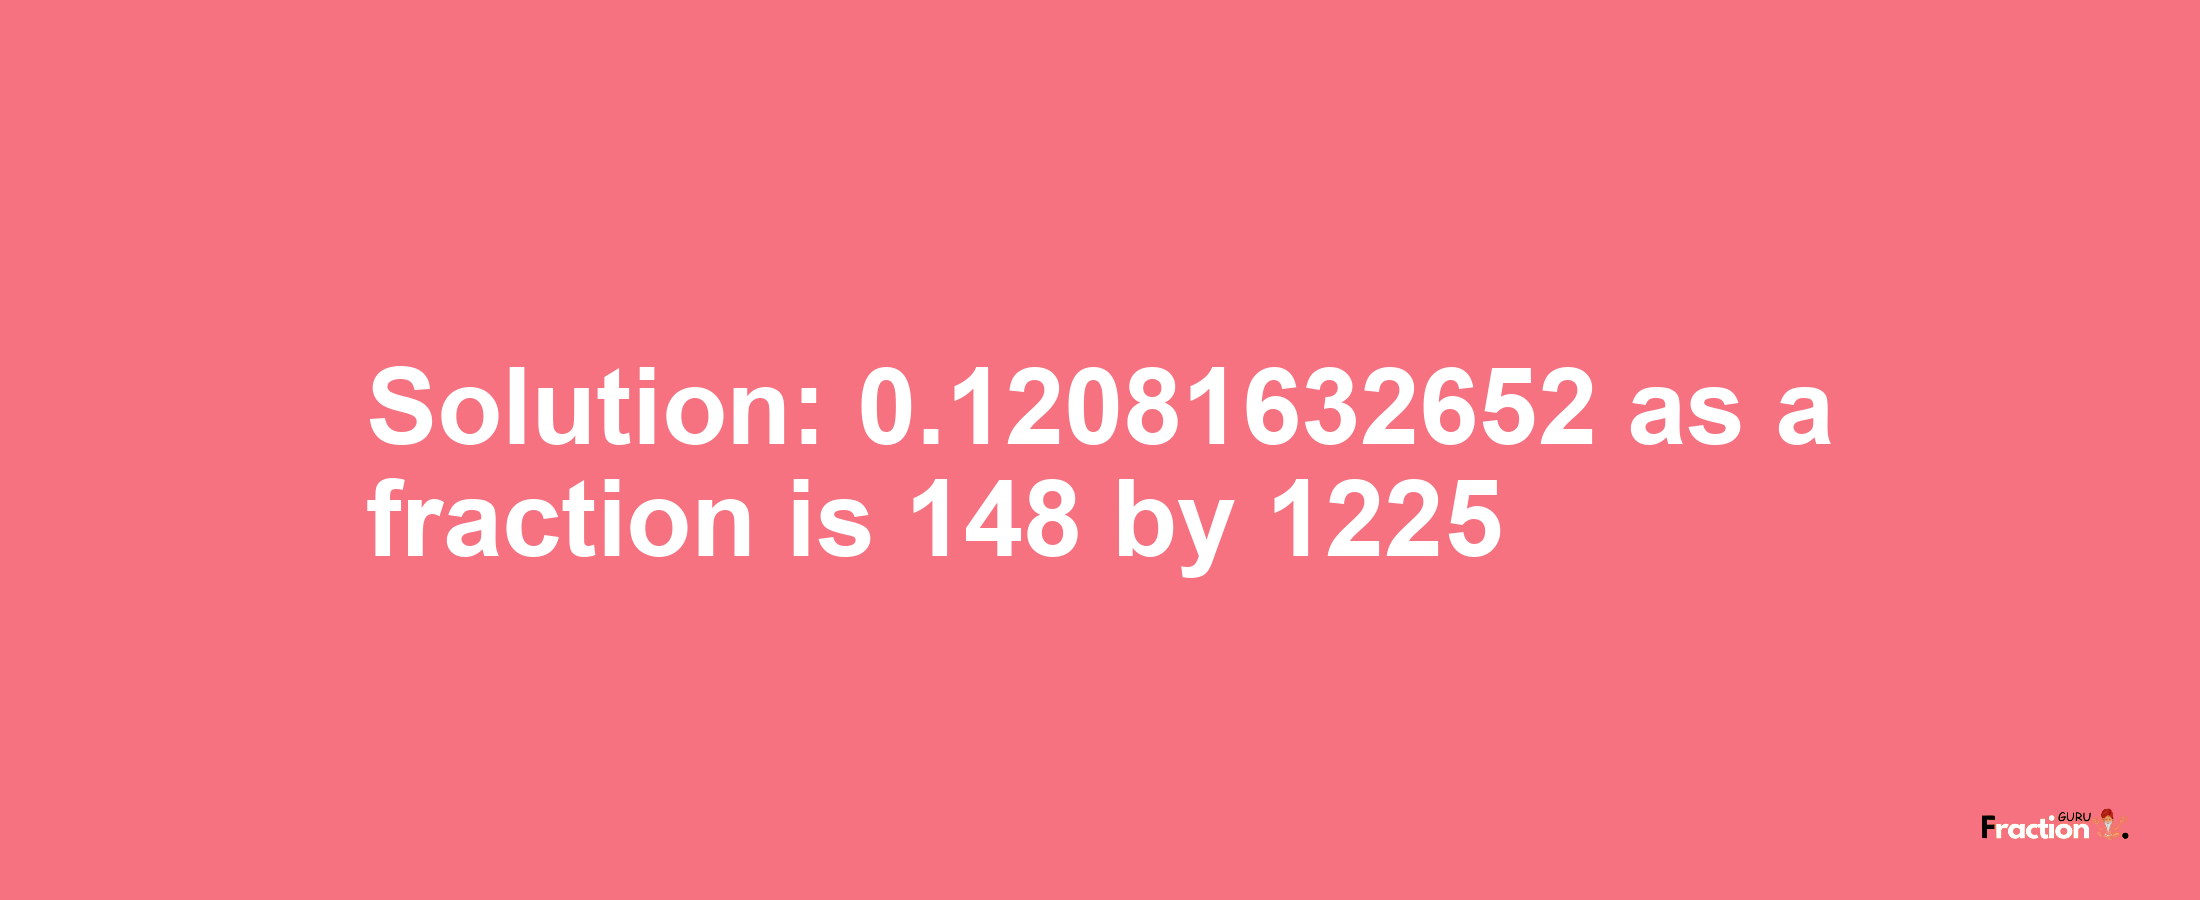 Solution:0.12081632652 as a fraction is 148/1225